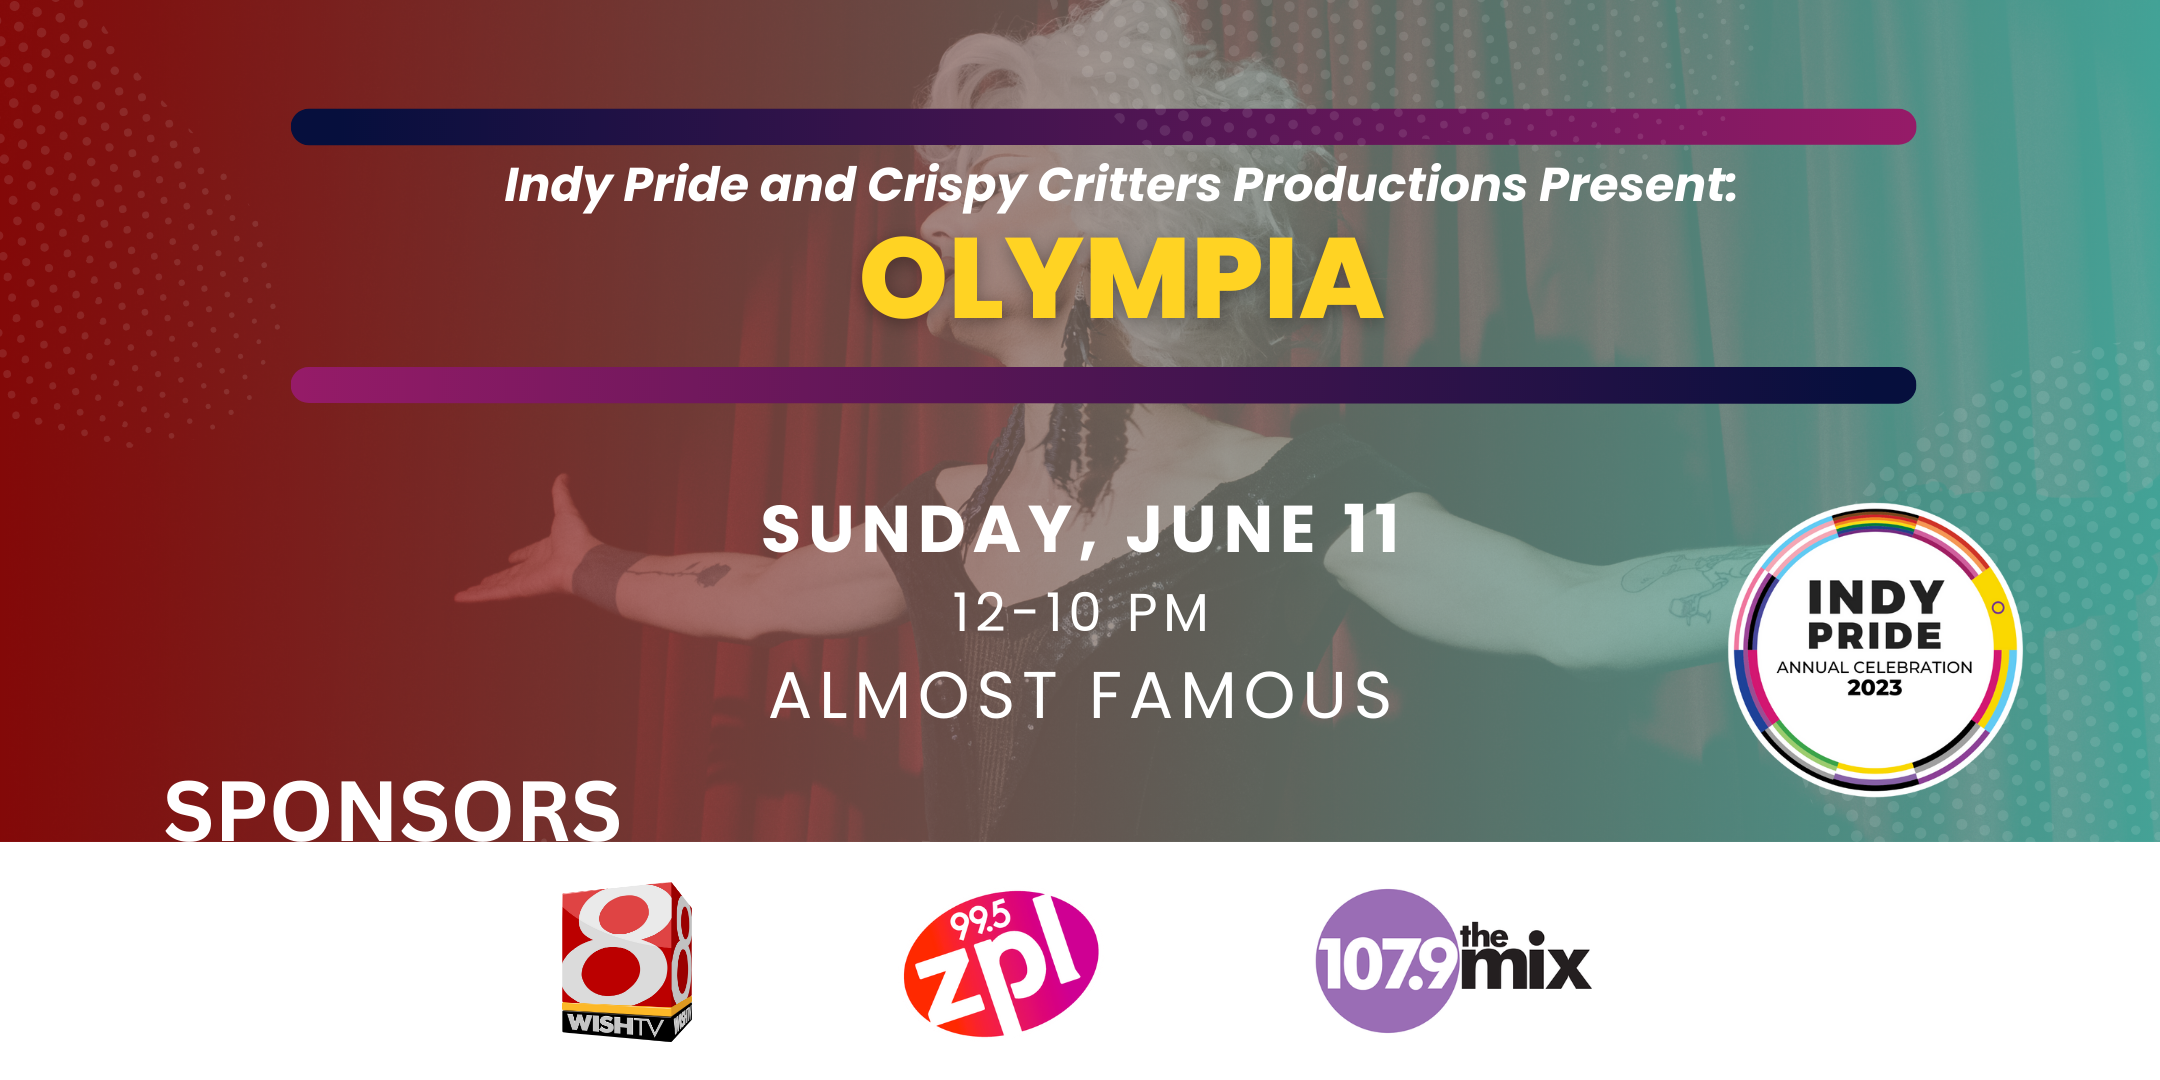 Indy Pride and Crispy Critters Productions present Olympia